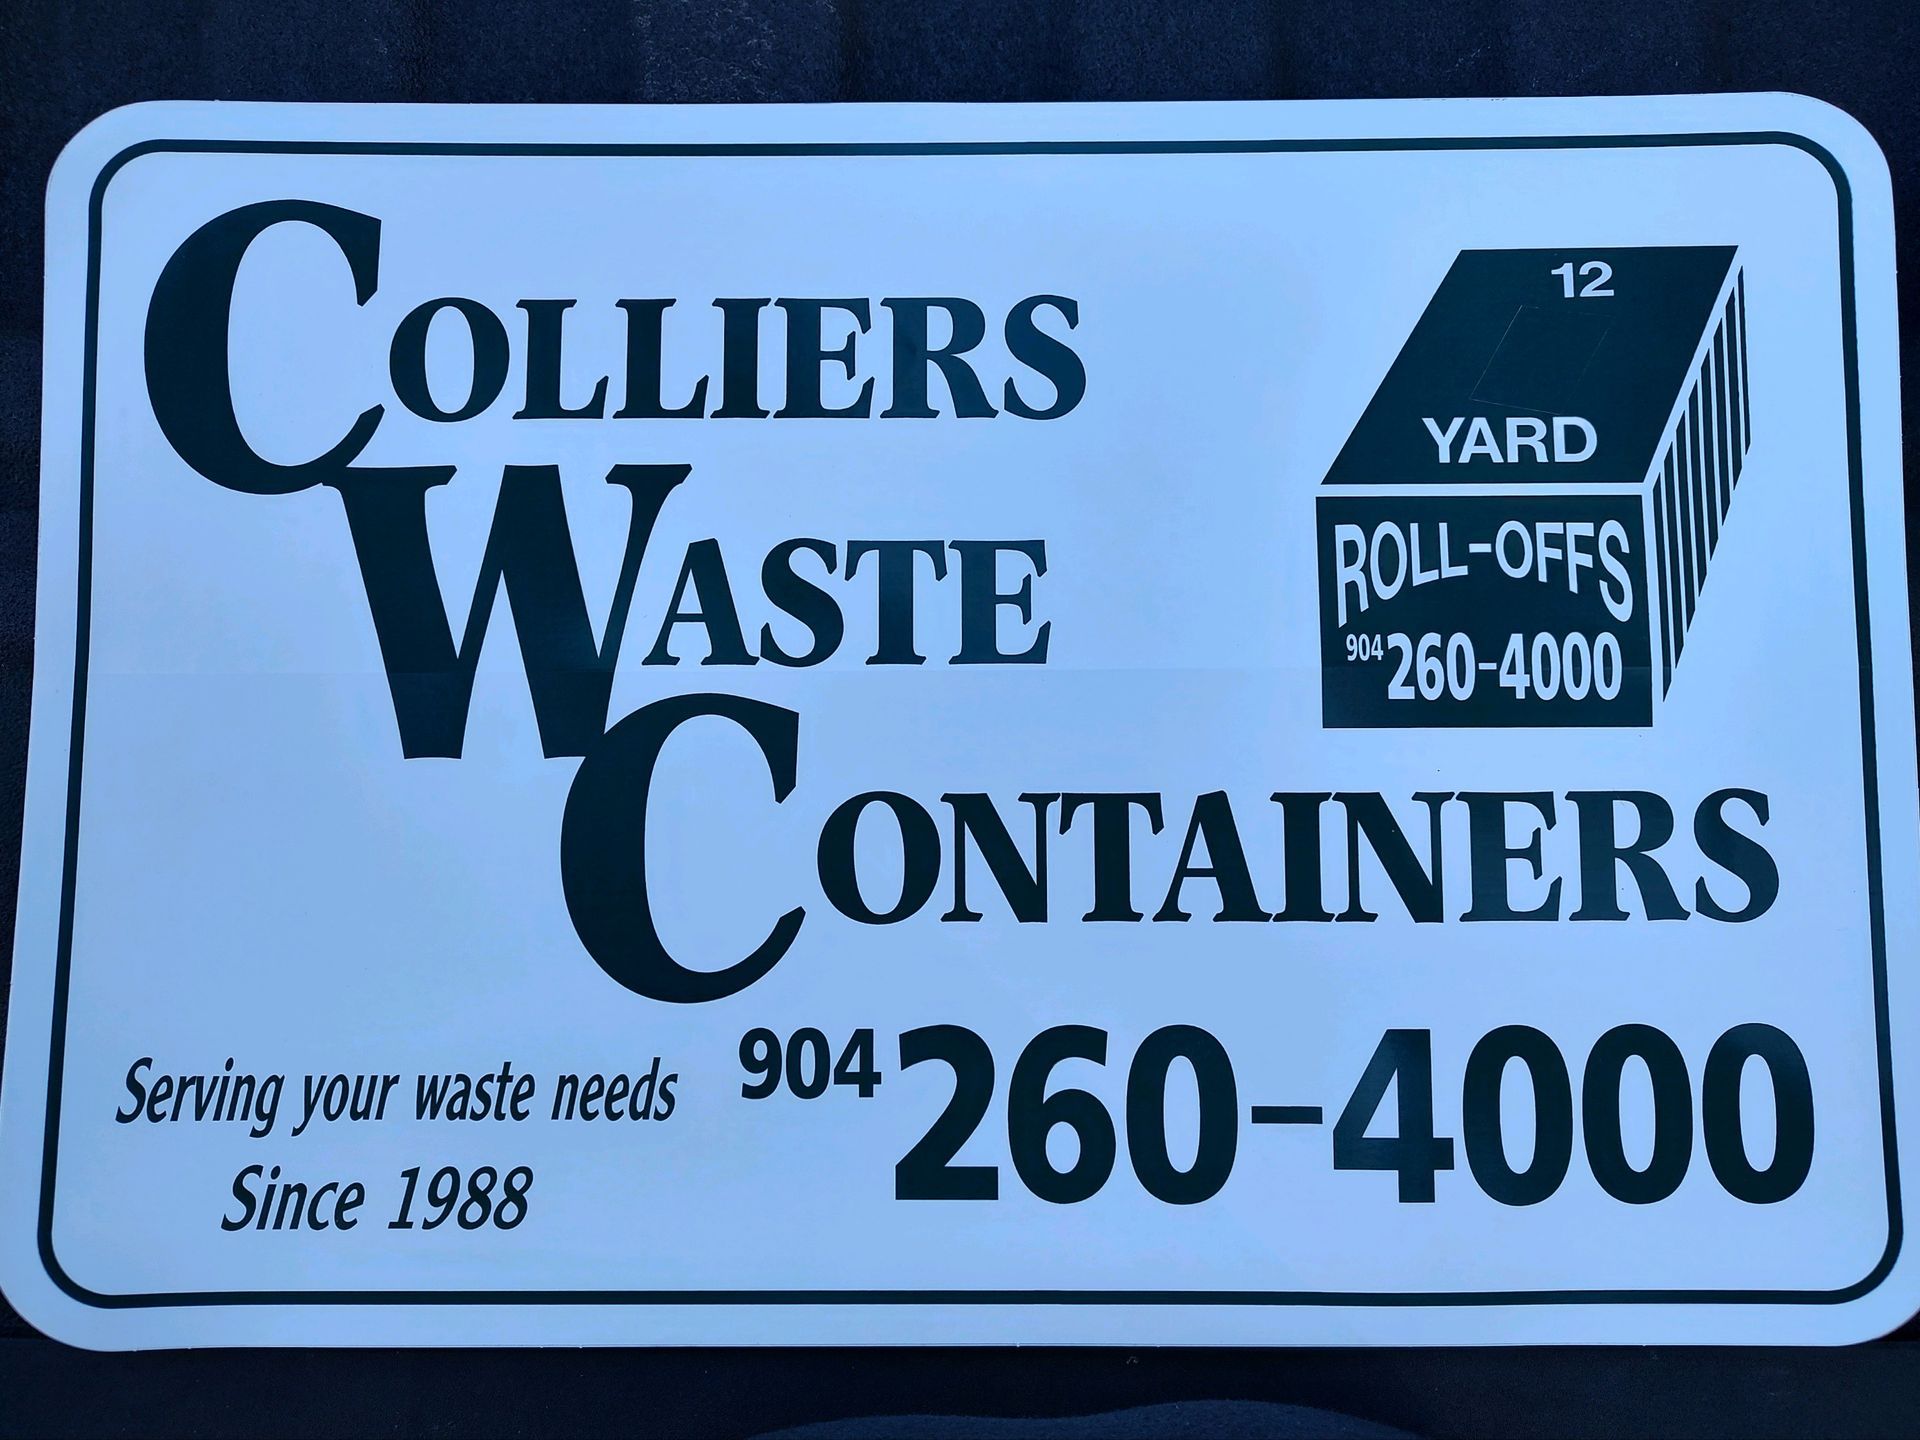 Collier’s Waste Containers, Inc.